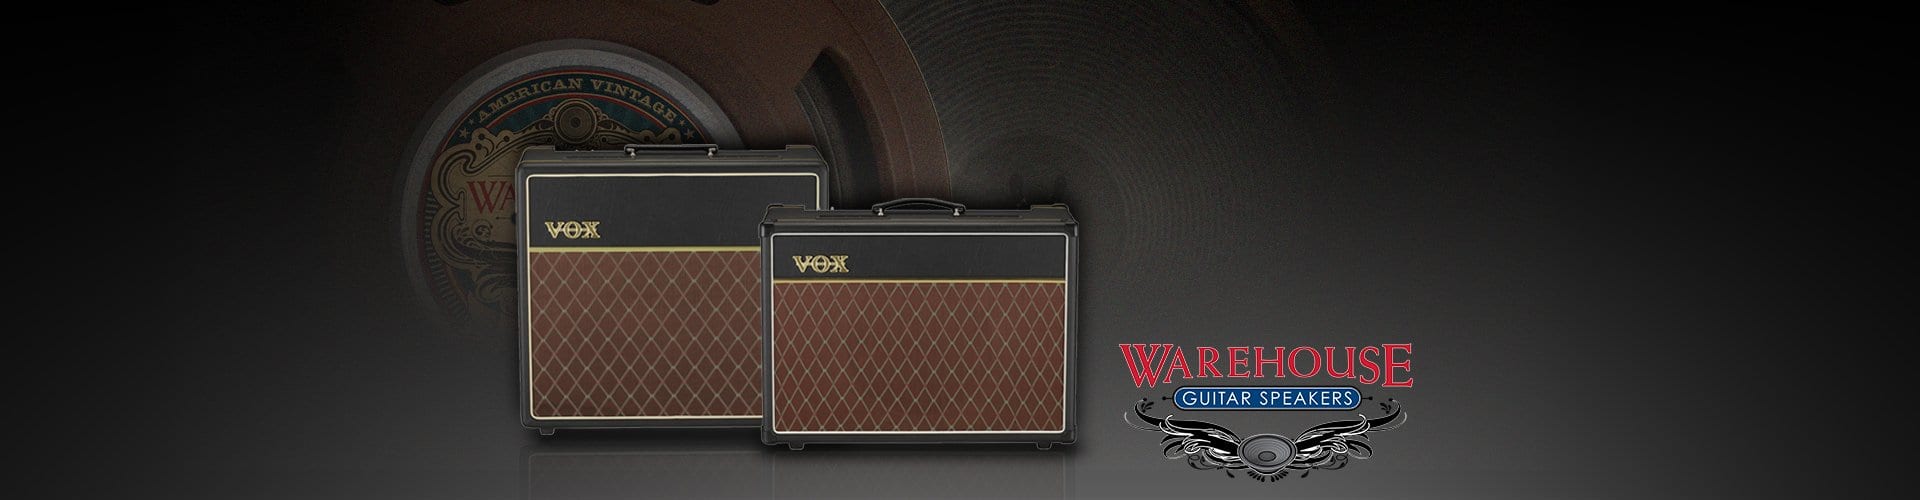 New Vox AC15 models with Warehouse speakers